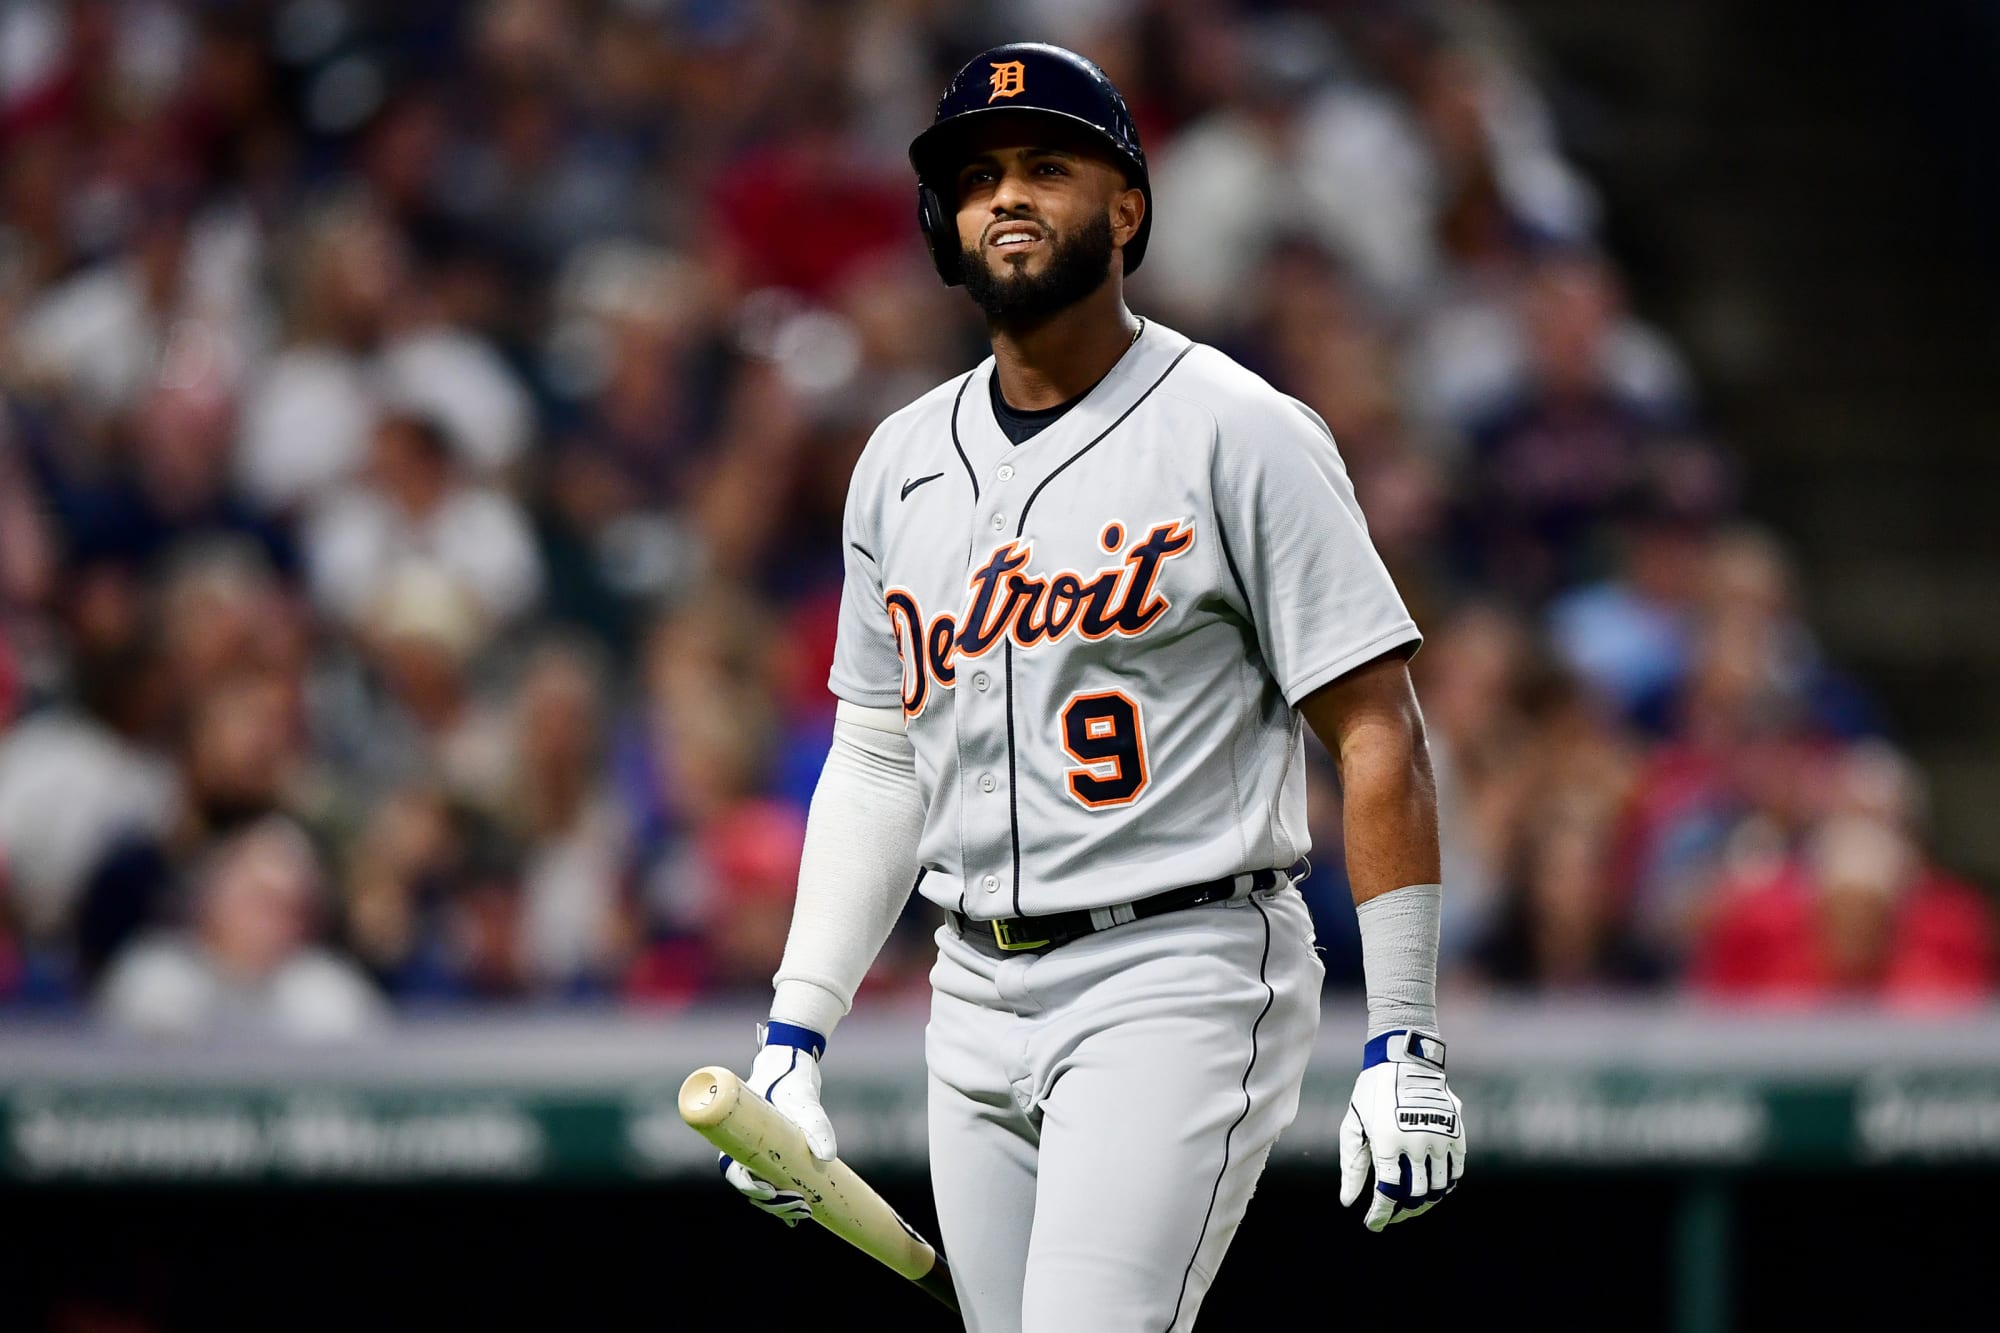 Willi Castro, the outfielder, might have played himself off Tigers